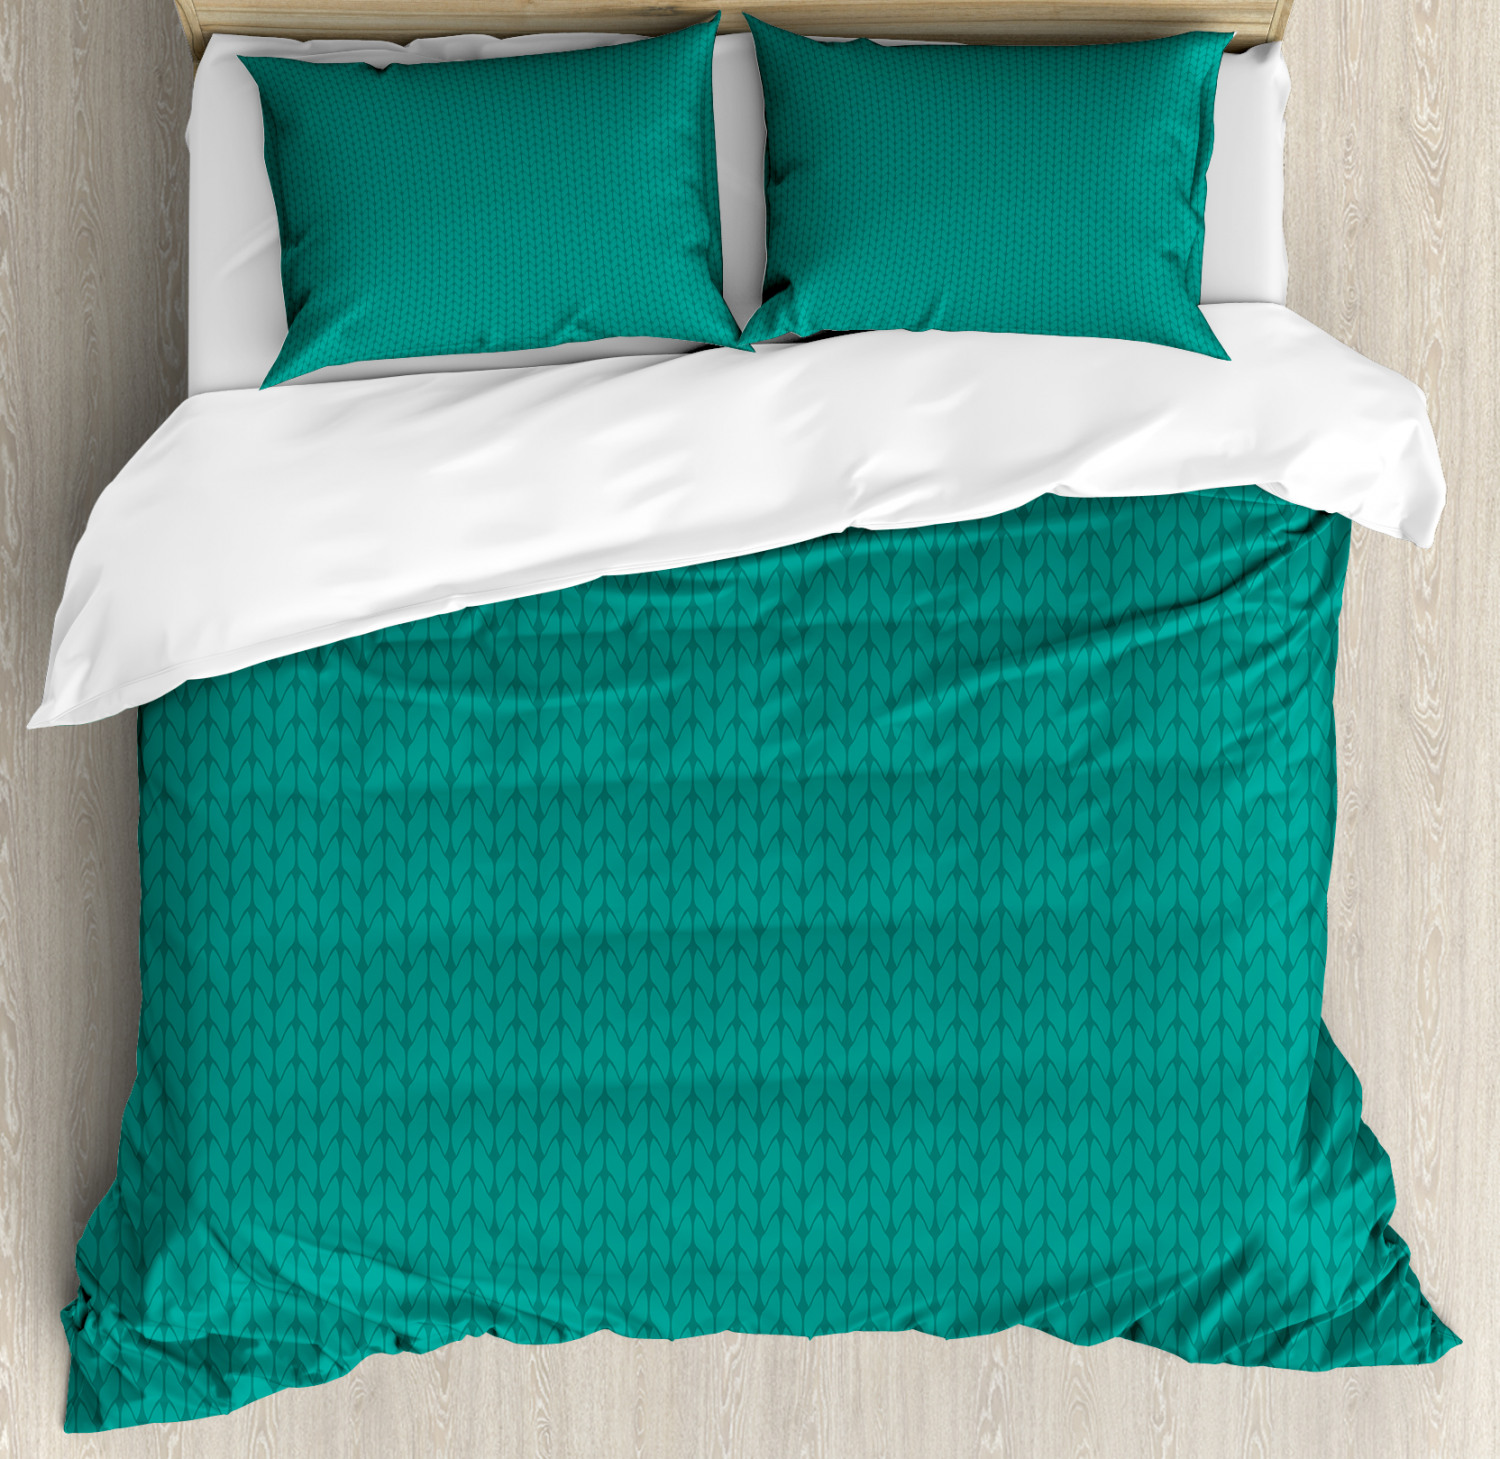 Teal Duvet Cover Set With Pillow Shams Knitting Sewing Hobby Print